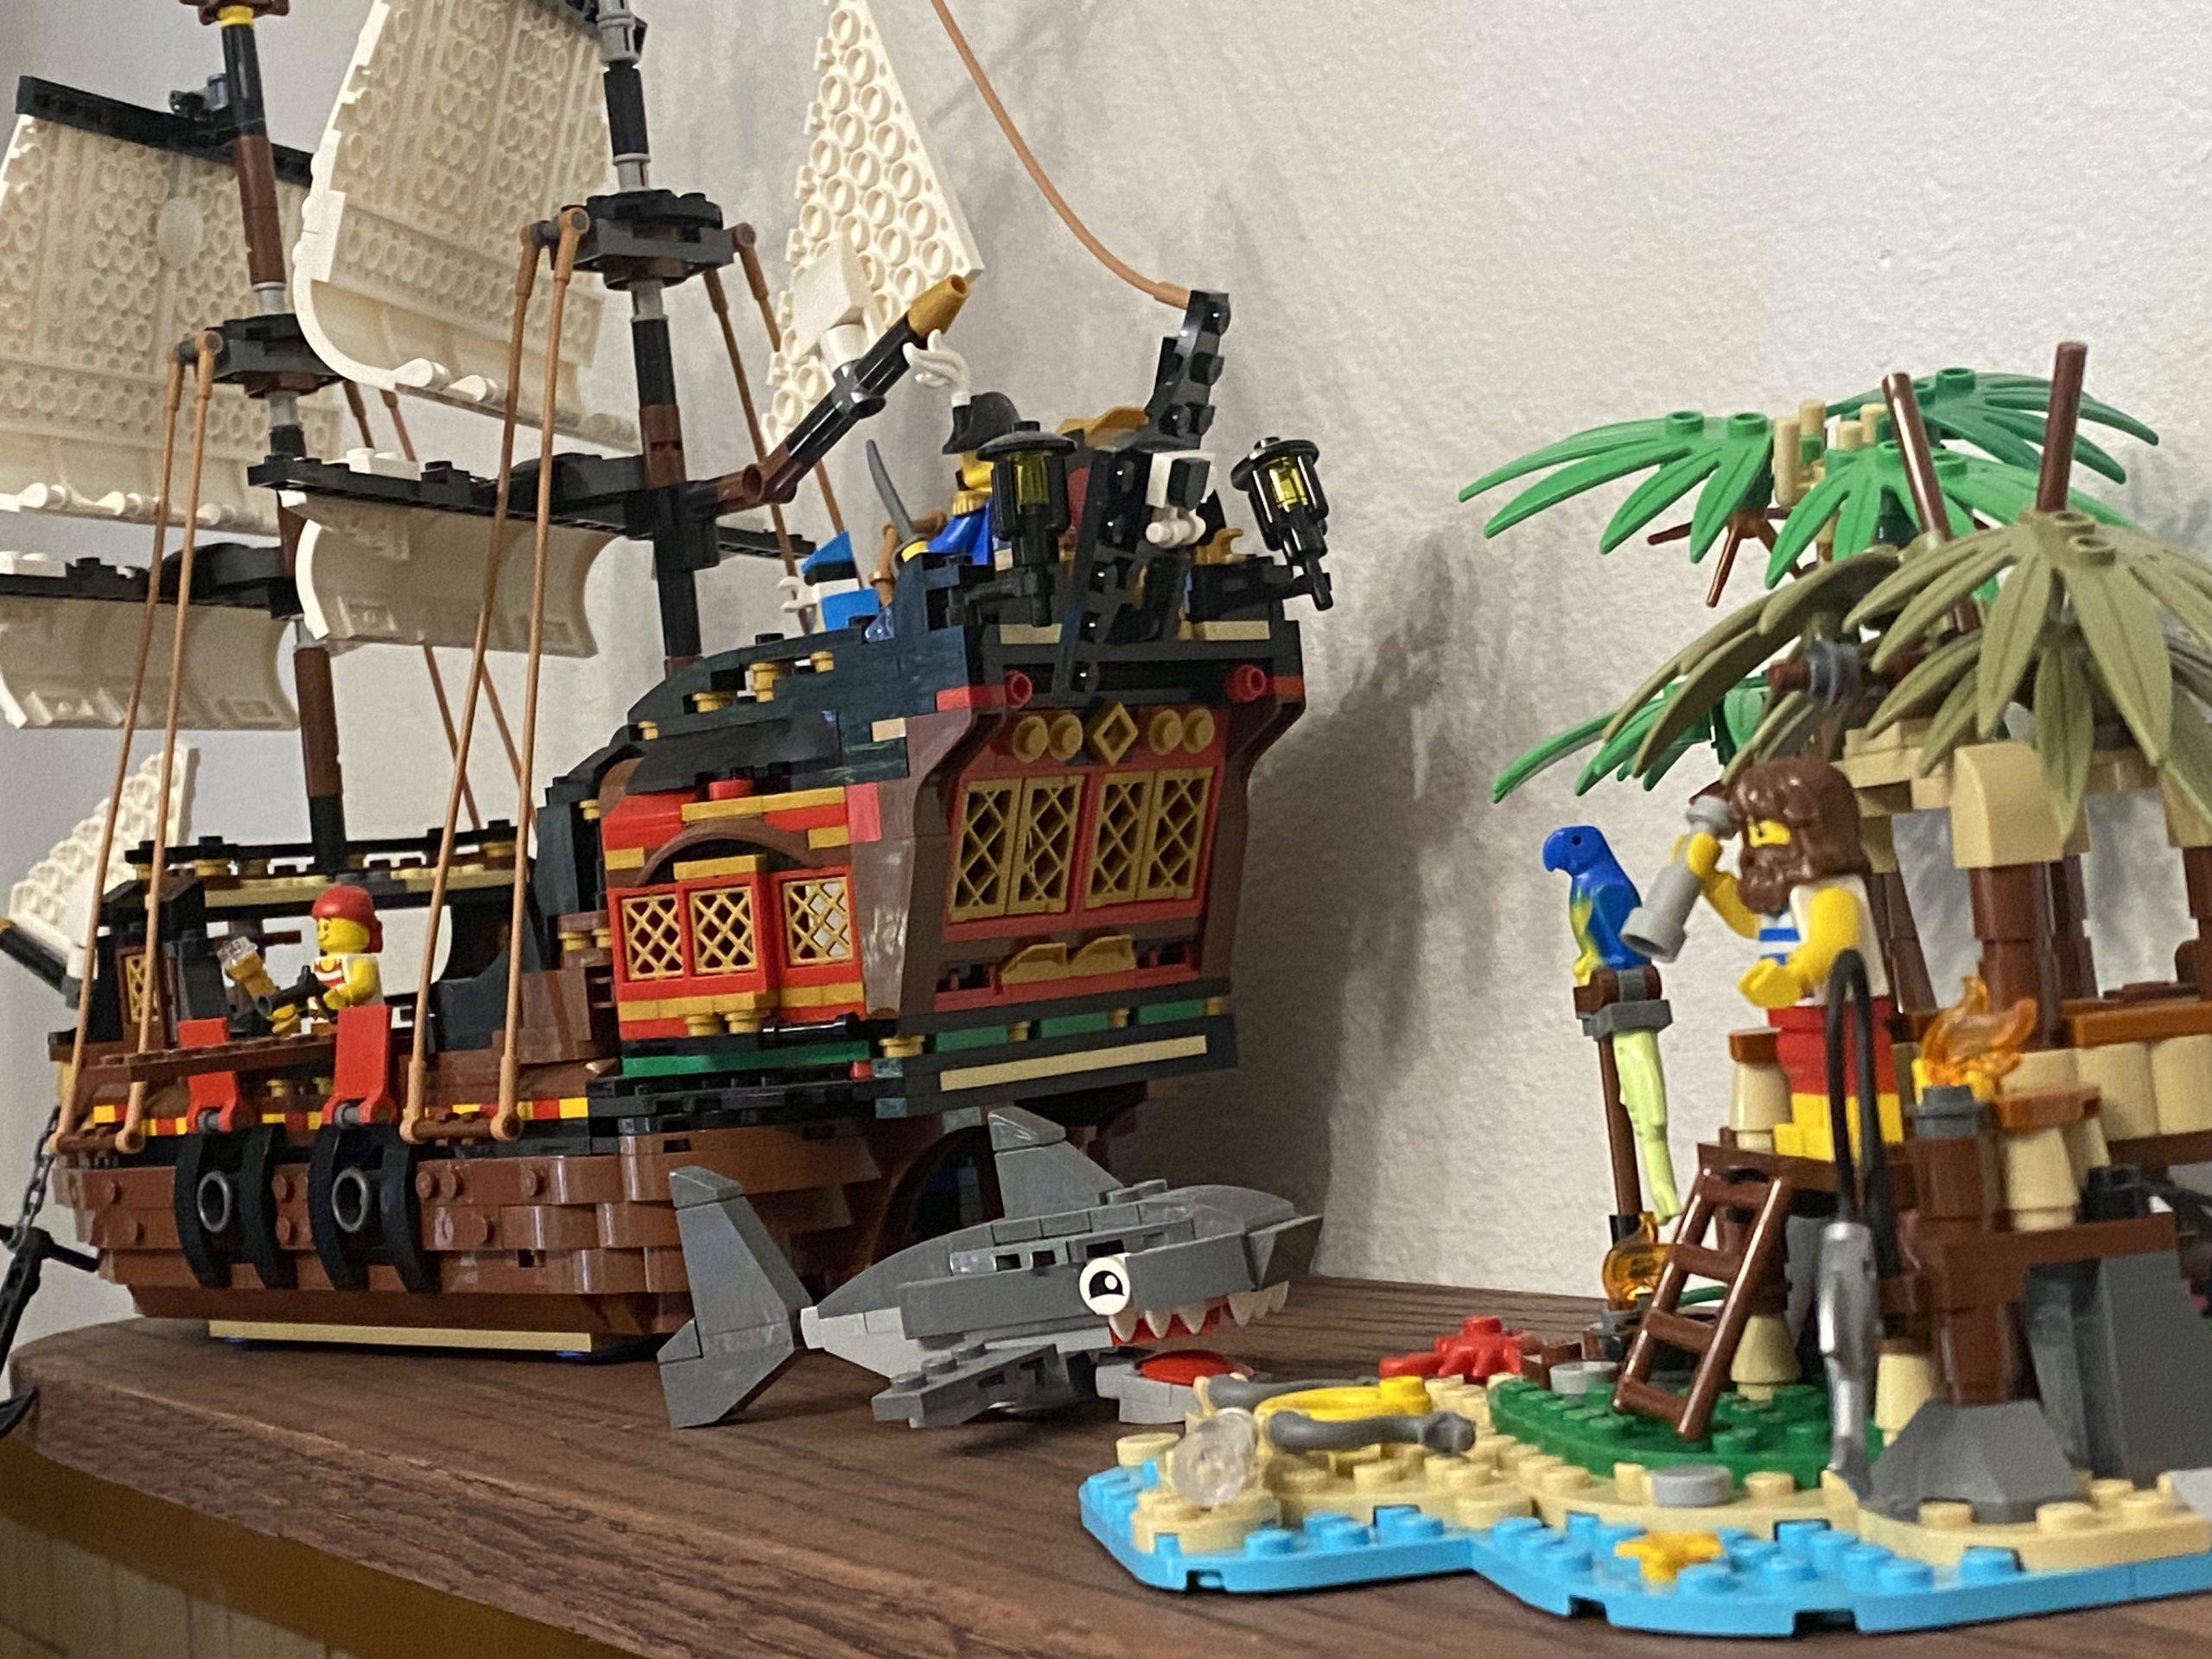 A Lego pirate ship, shark, and castaway on an island, viewed from behind the ship with the island in the foreground.